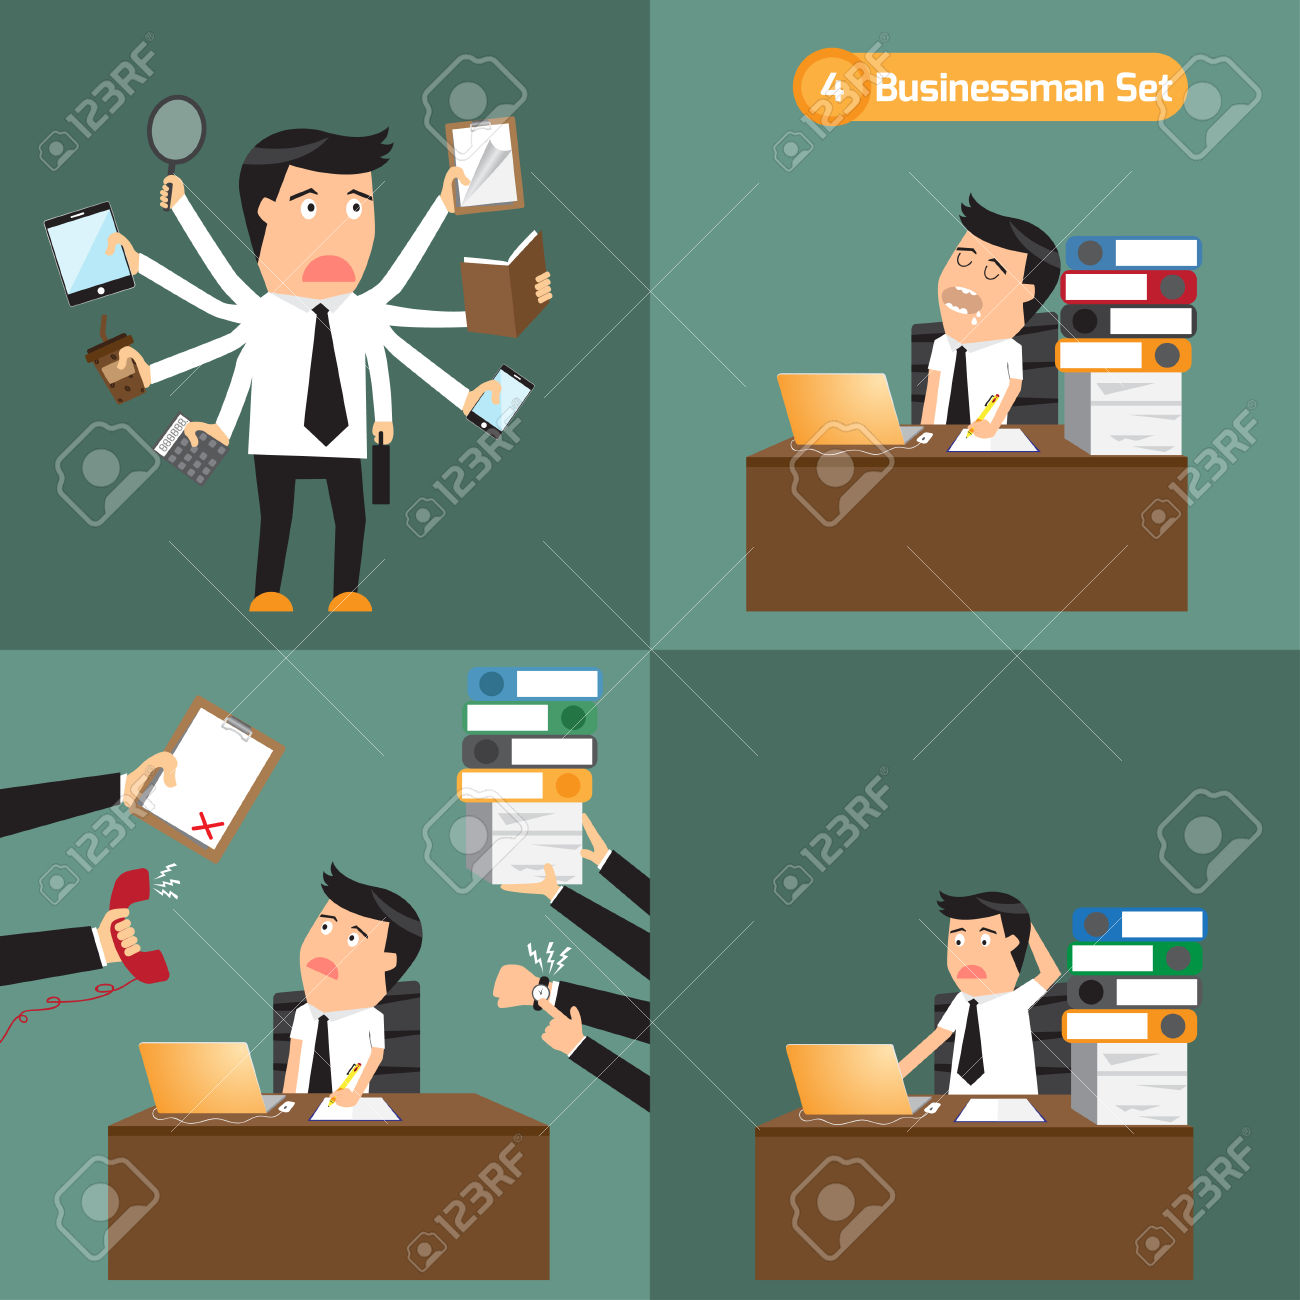 Business sales multi task icon free clipart.